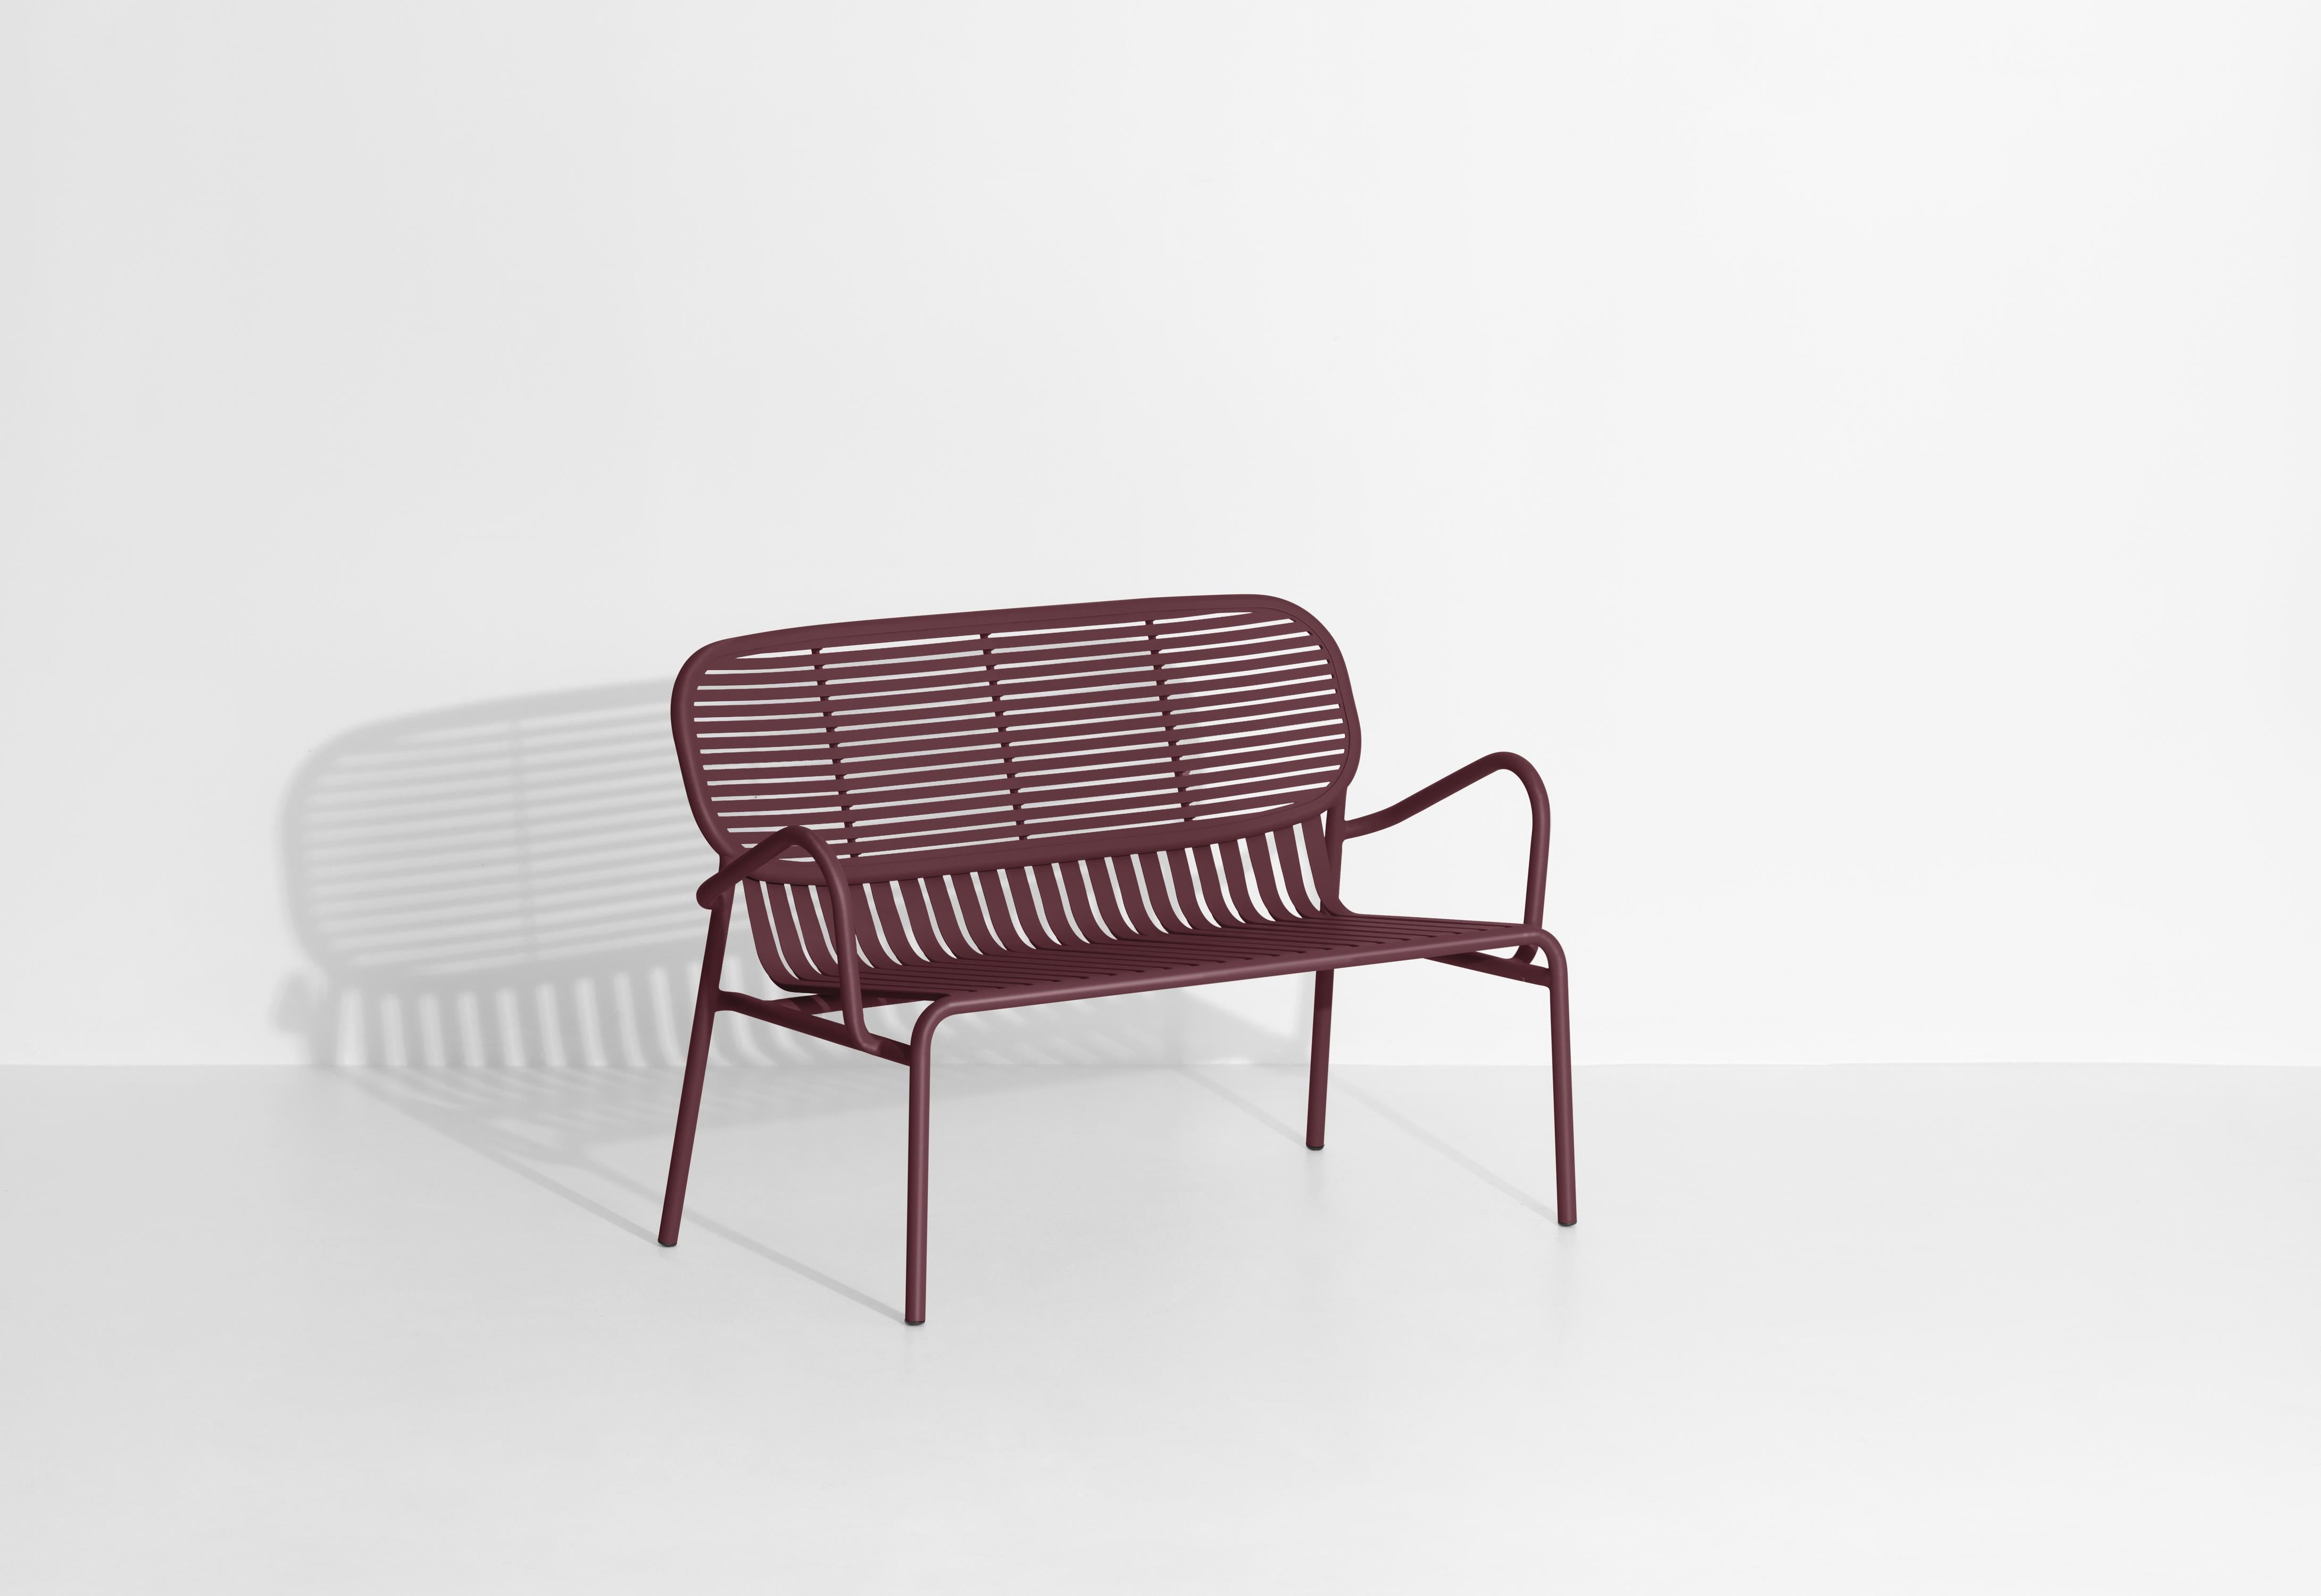 Petite Friture Week-End Sofa in Burgundy Aluminium by Studio BrichetZiegler In New Condition For Sale In Brooklyn, NY